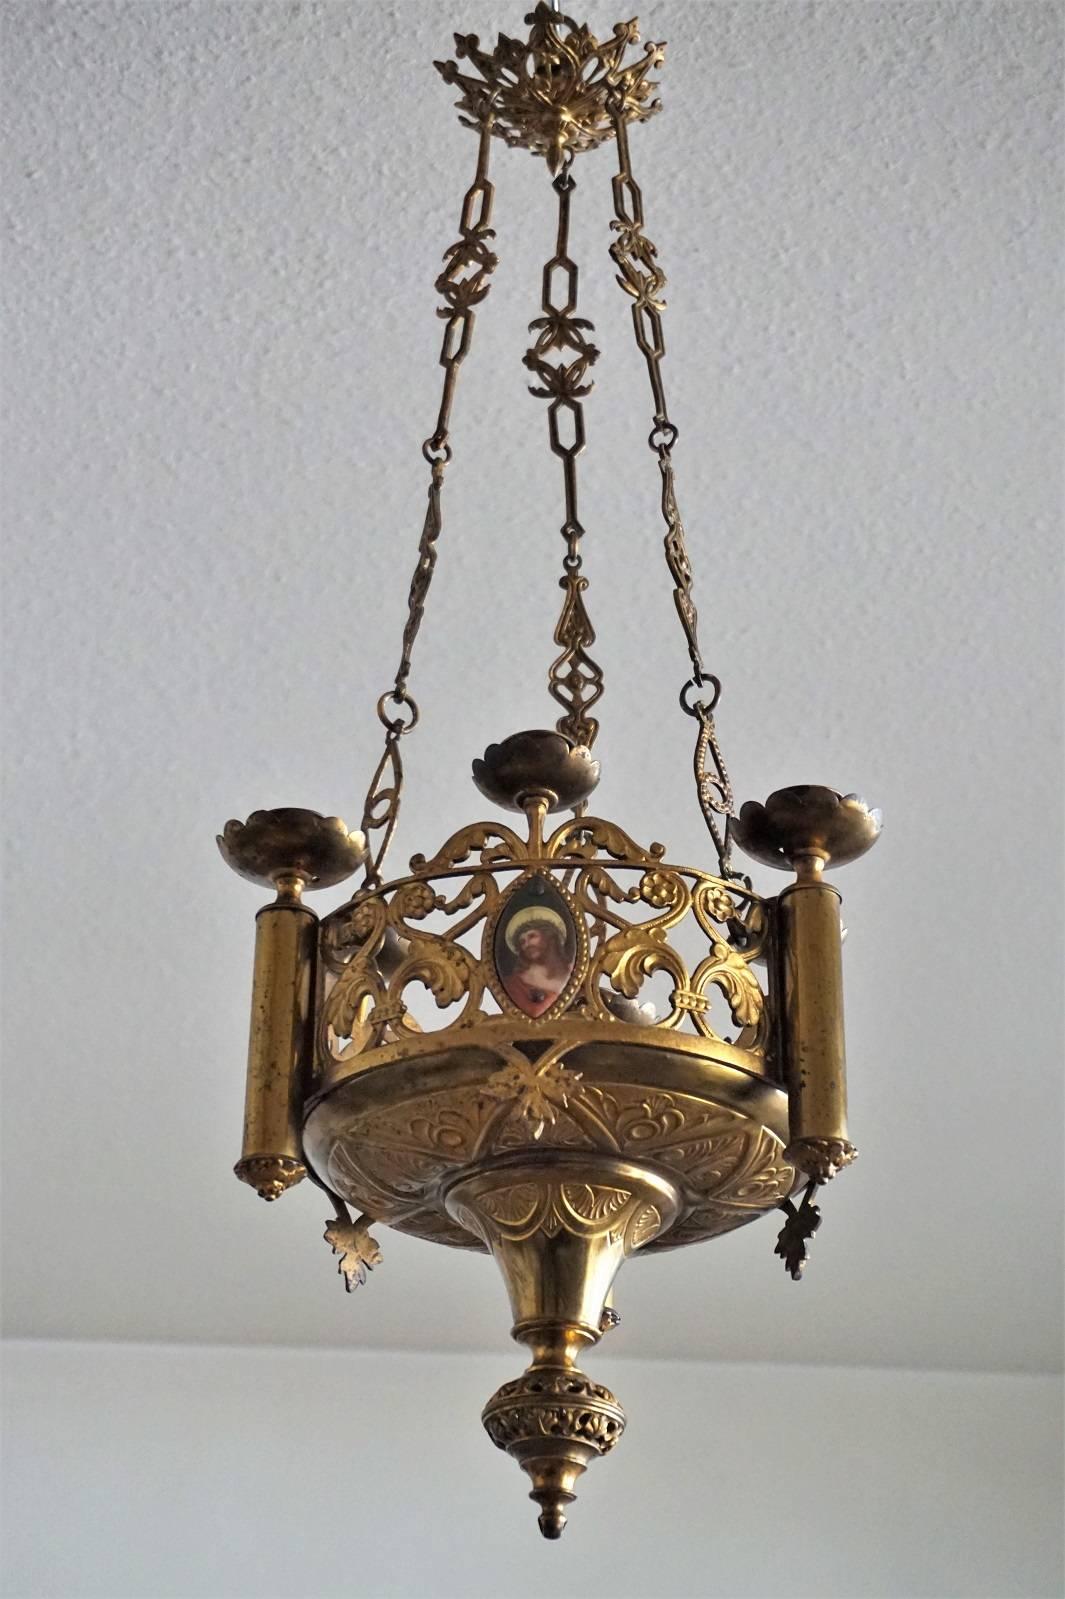 Stunning Gothic Revival style fire-gilded bronze and parcel-brass church candle chandelier / hanging sanctuary lamp, Spain, late 18th century, probably from a family with a private chapel. Crown shape body decorated with three hand-painted porcelain